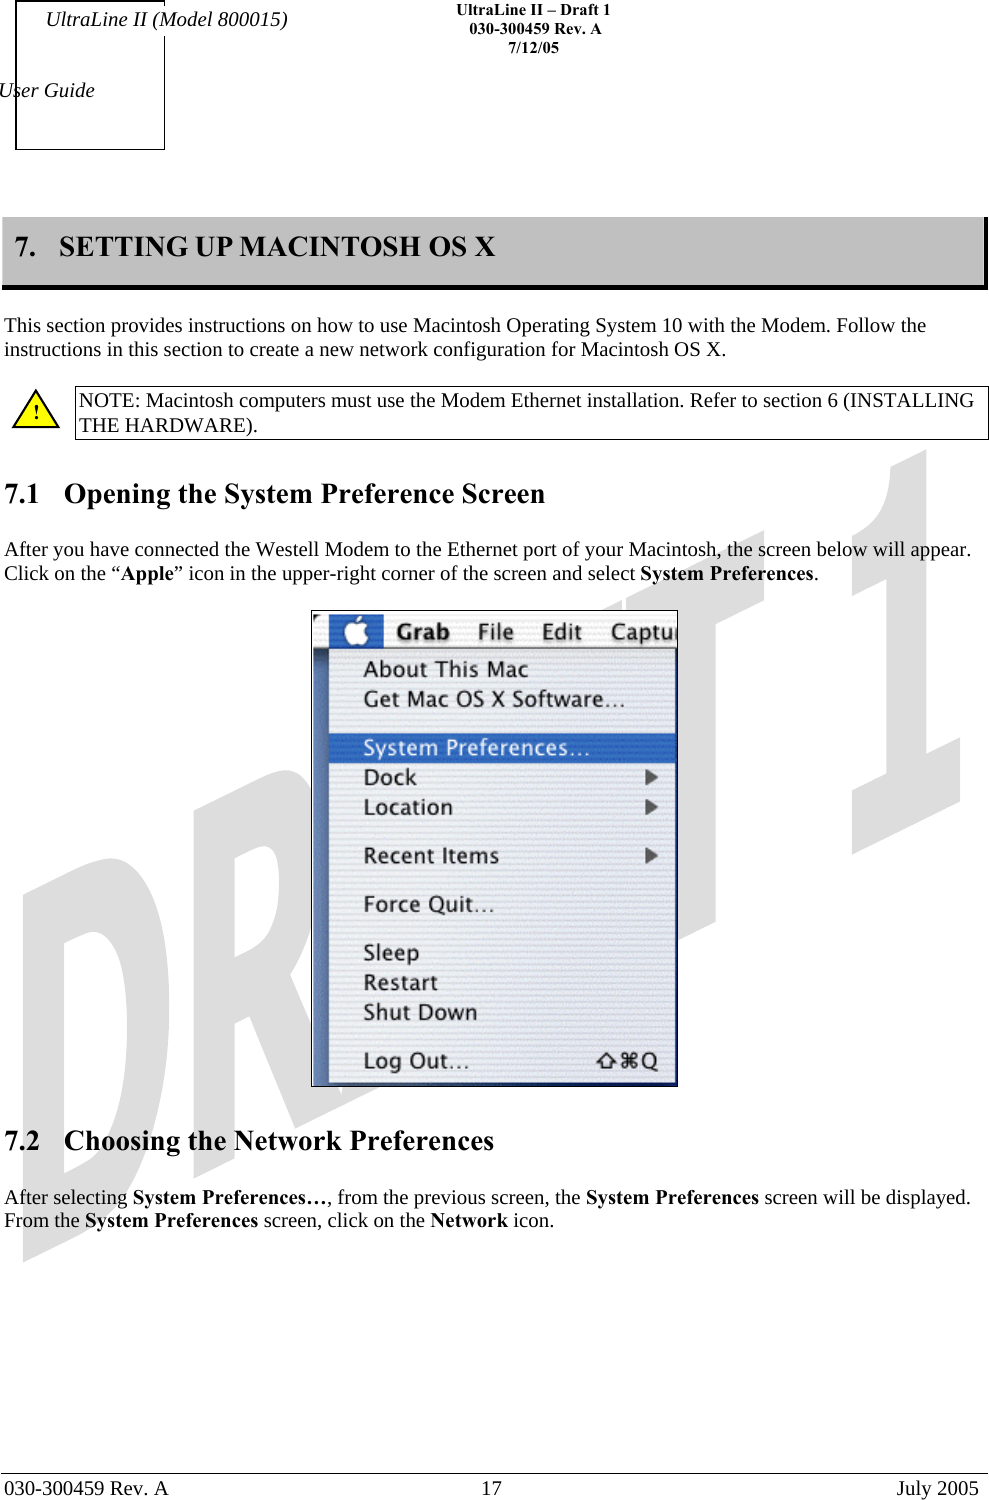    UltraLine II – Draft 1   030-300459 Rev. A 7/12/05   030-300459 Rev. A  17  July 2005  User Guide UltraLine II (Model 800015) 7.  SETTING UP MACINTOSH OS X  This section provides instructions on how to use Macintosh Operating System 10 with the Modem. Follow the instructions in this section to create a new network configuration for Macintosh OS X.  NOTE: Macintosh computers must use the Modem Ethernet installation. Refer to section 6 (INSTALLING THE HARDWARE).  7.1  Opening the System Preference Screen  After you have connected the Westell Modem to the Ethernet port of your Macintosh, the screen below will appear. Click on the “Apple” icon in the upper-right corner of the screen and select System Preferences.     7.2  Choosing the Network Preferences  After selecting System Preferences…, from the previous screen, the System Preferences screen will be displayed. From the System Preferences screen, click on the Network icon.  ! 